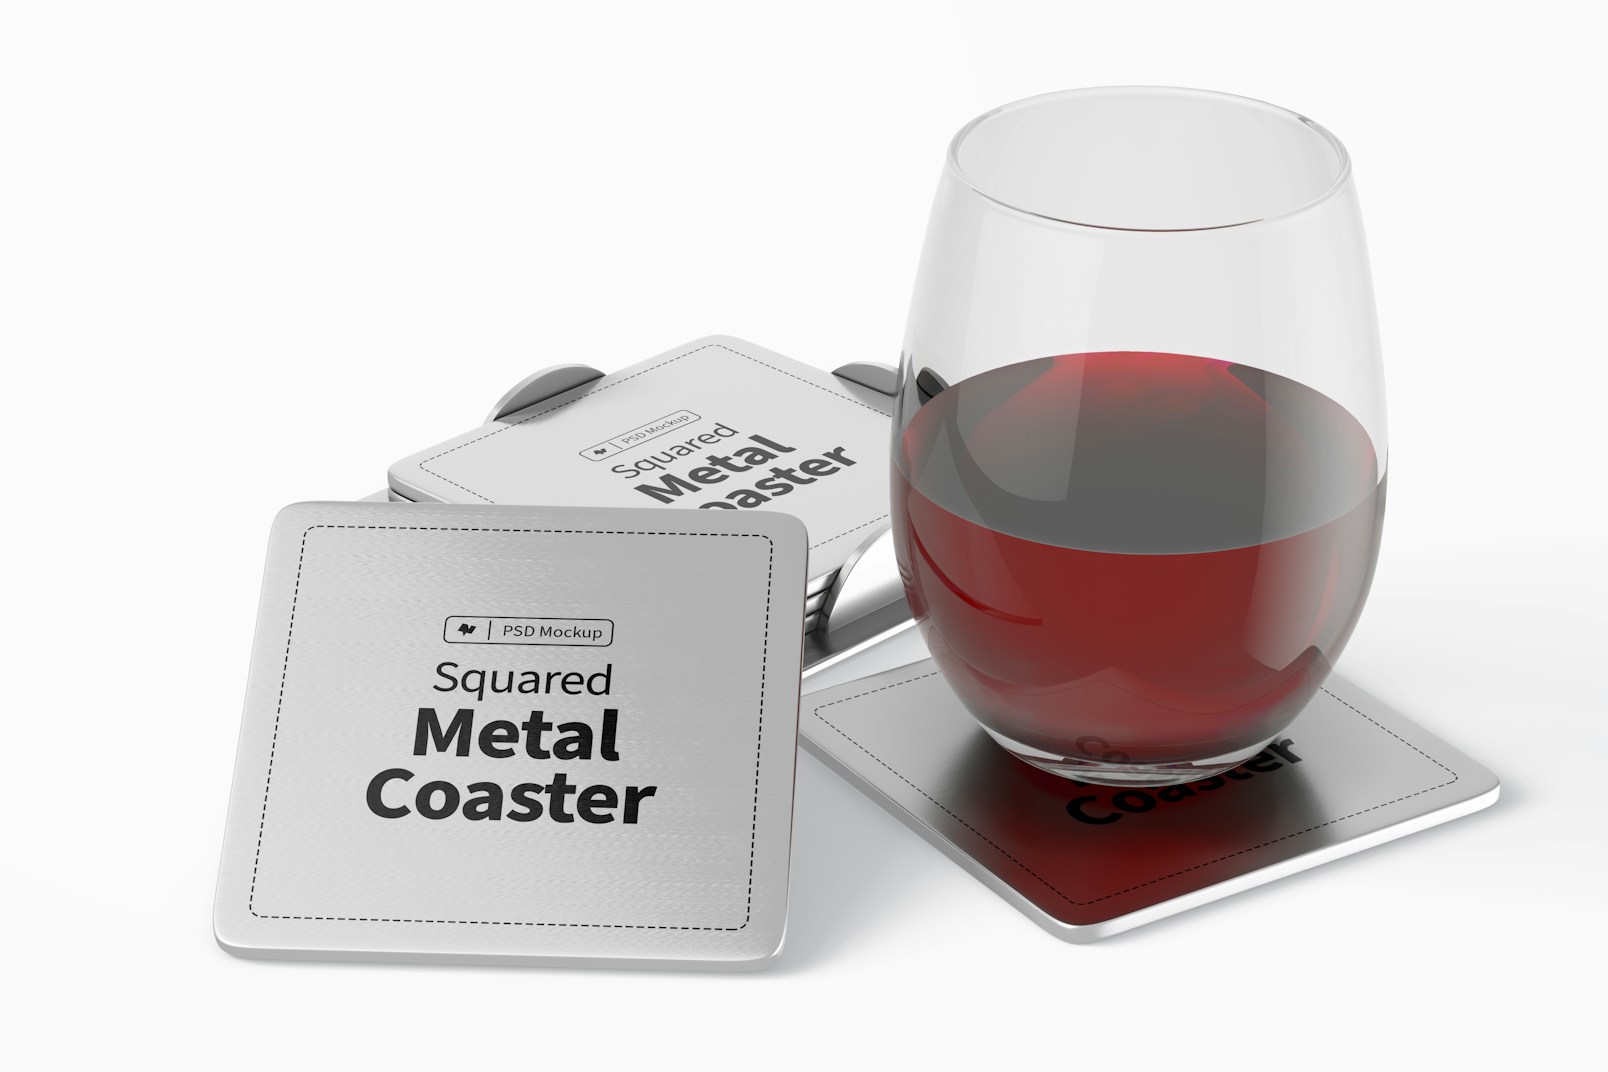 Squared Metal Coaster with Glass Mockup